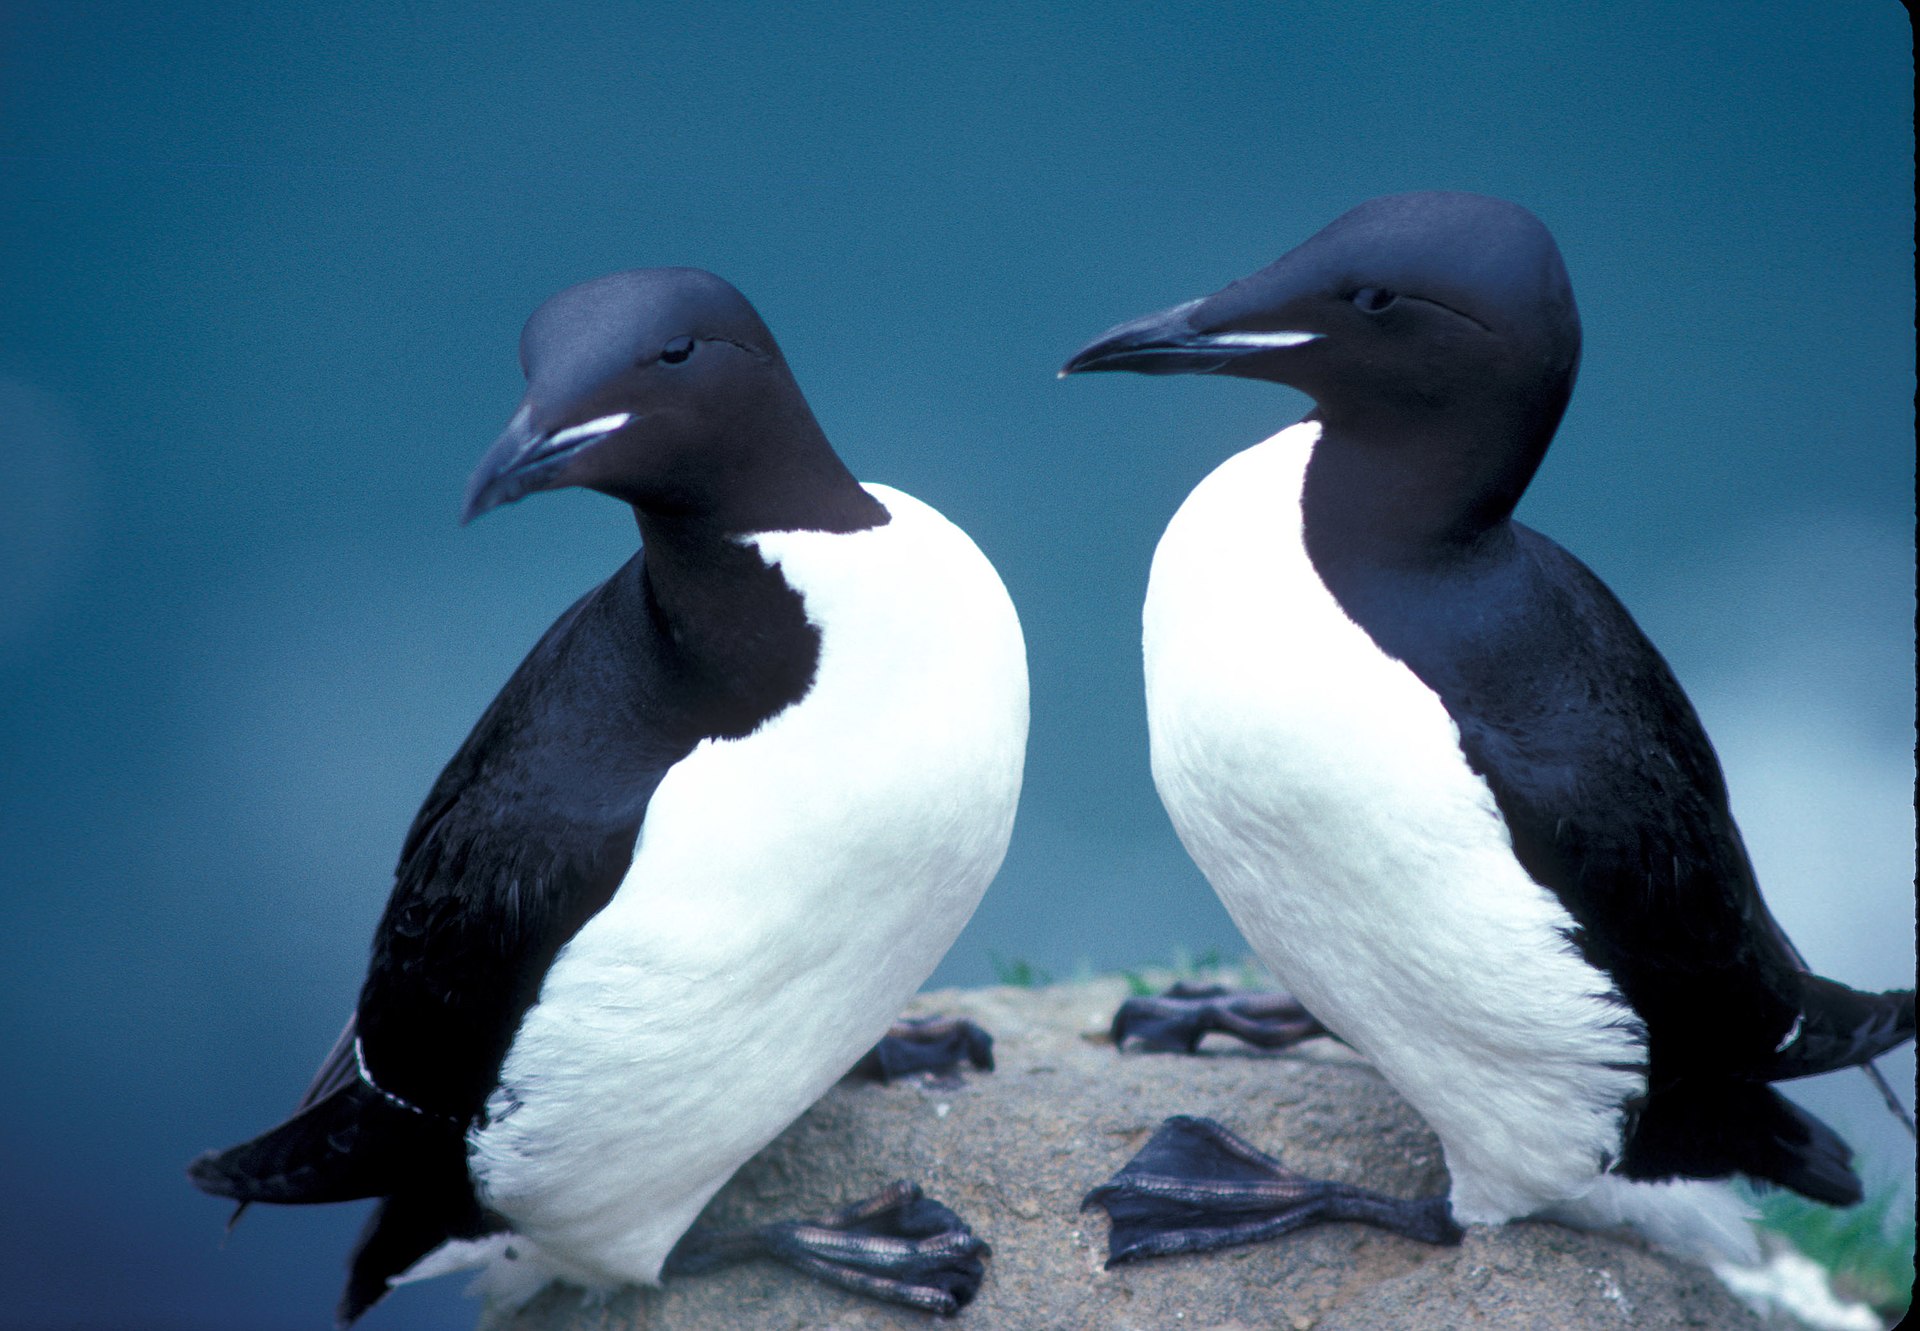 Two thick-billed Murres, Black Sea birds with white bellies, stand on a rock facing each other. 